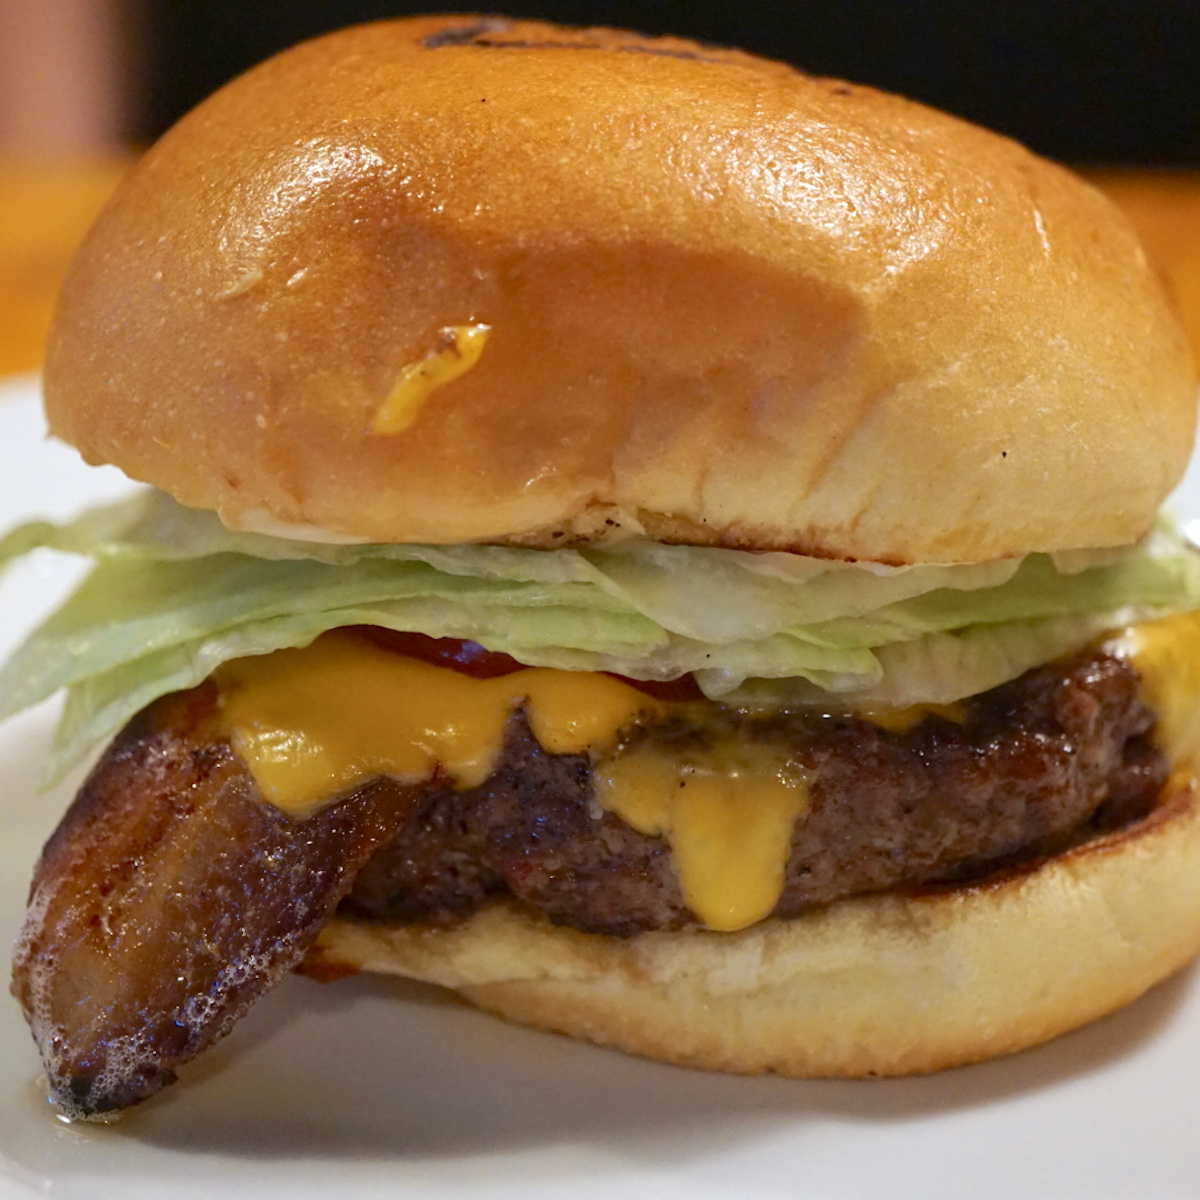 Classic Cheeseburger with Bacon from LoKal in Coconut Grove, Florida